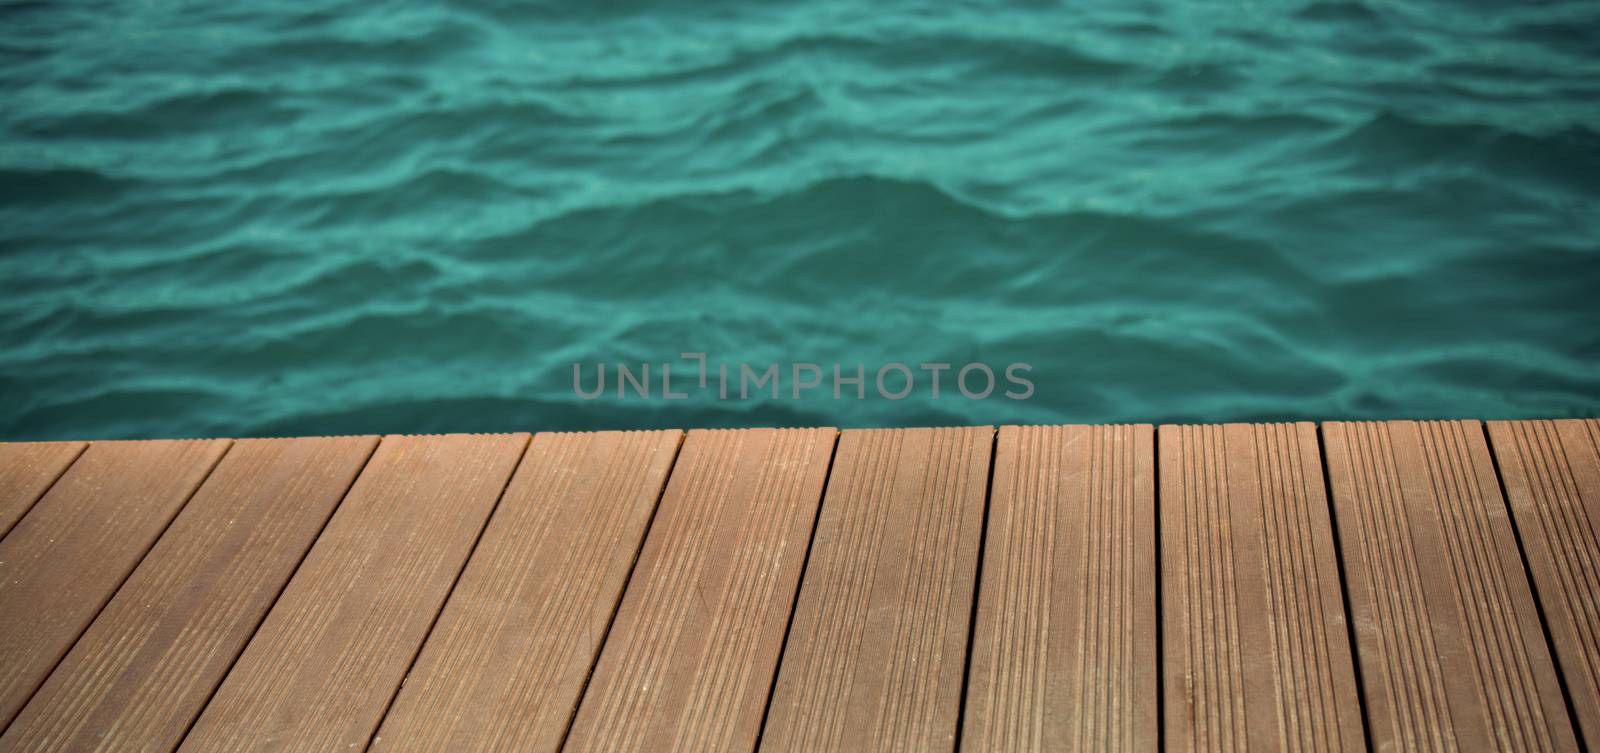 Water and wood texture useful as a background